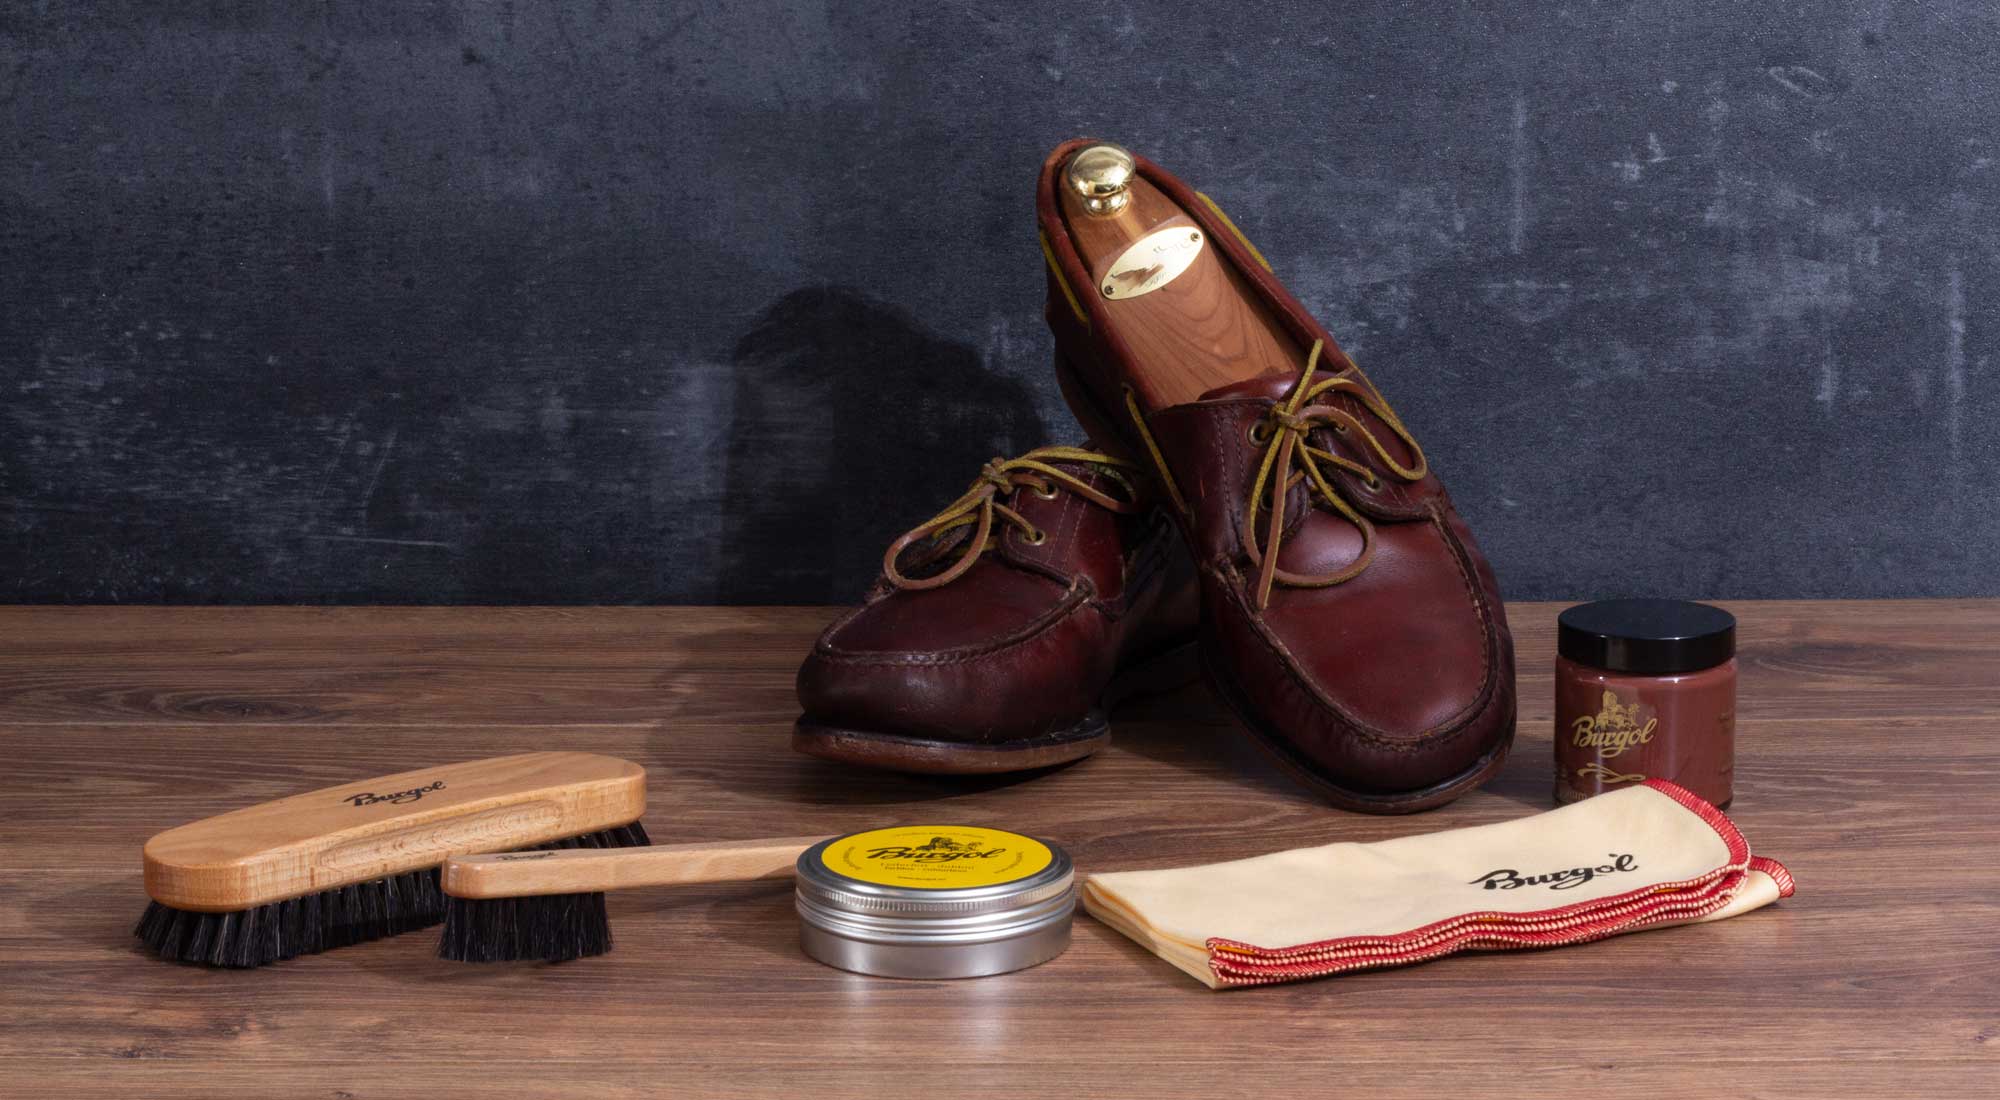 Shoecare for shoes made of greasy leather